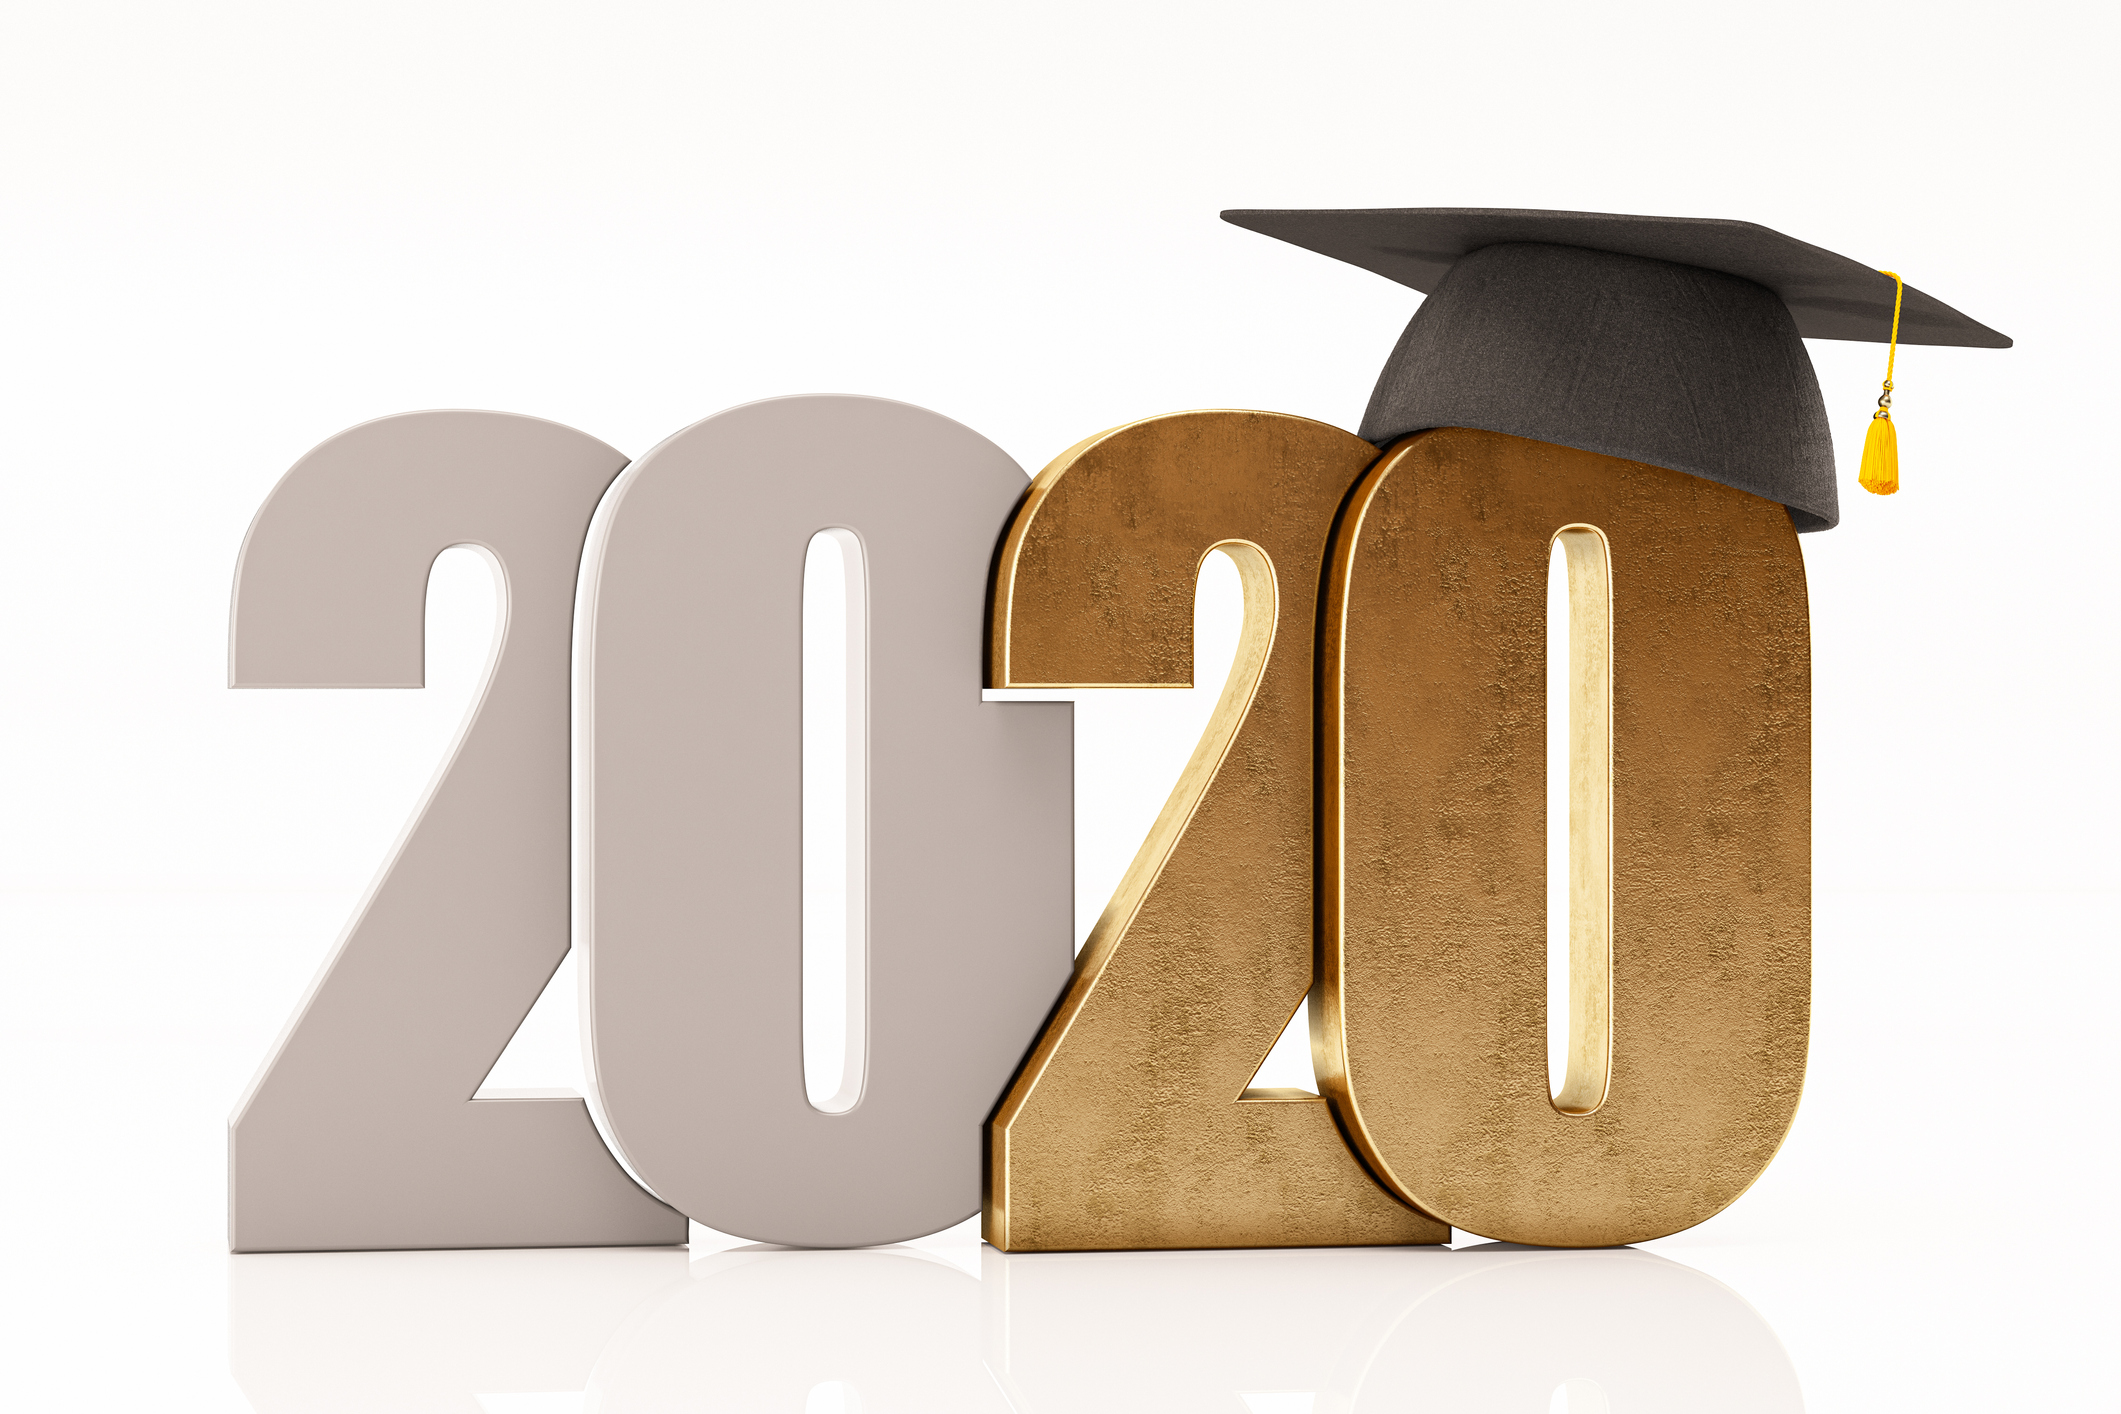 2020 in block letters with graduation cap